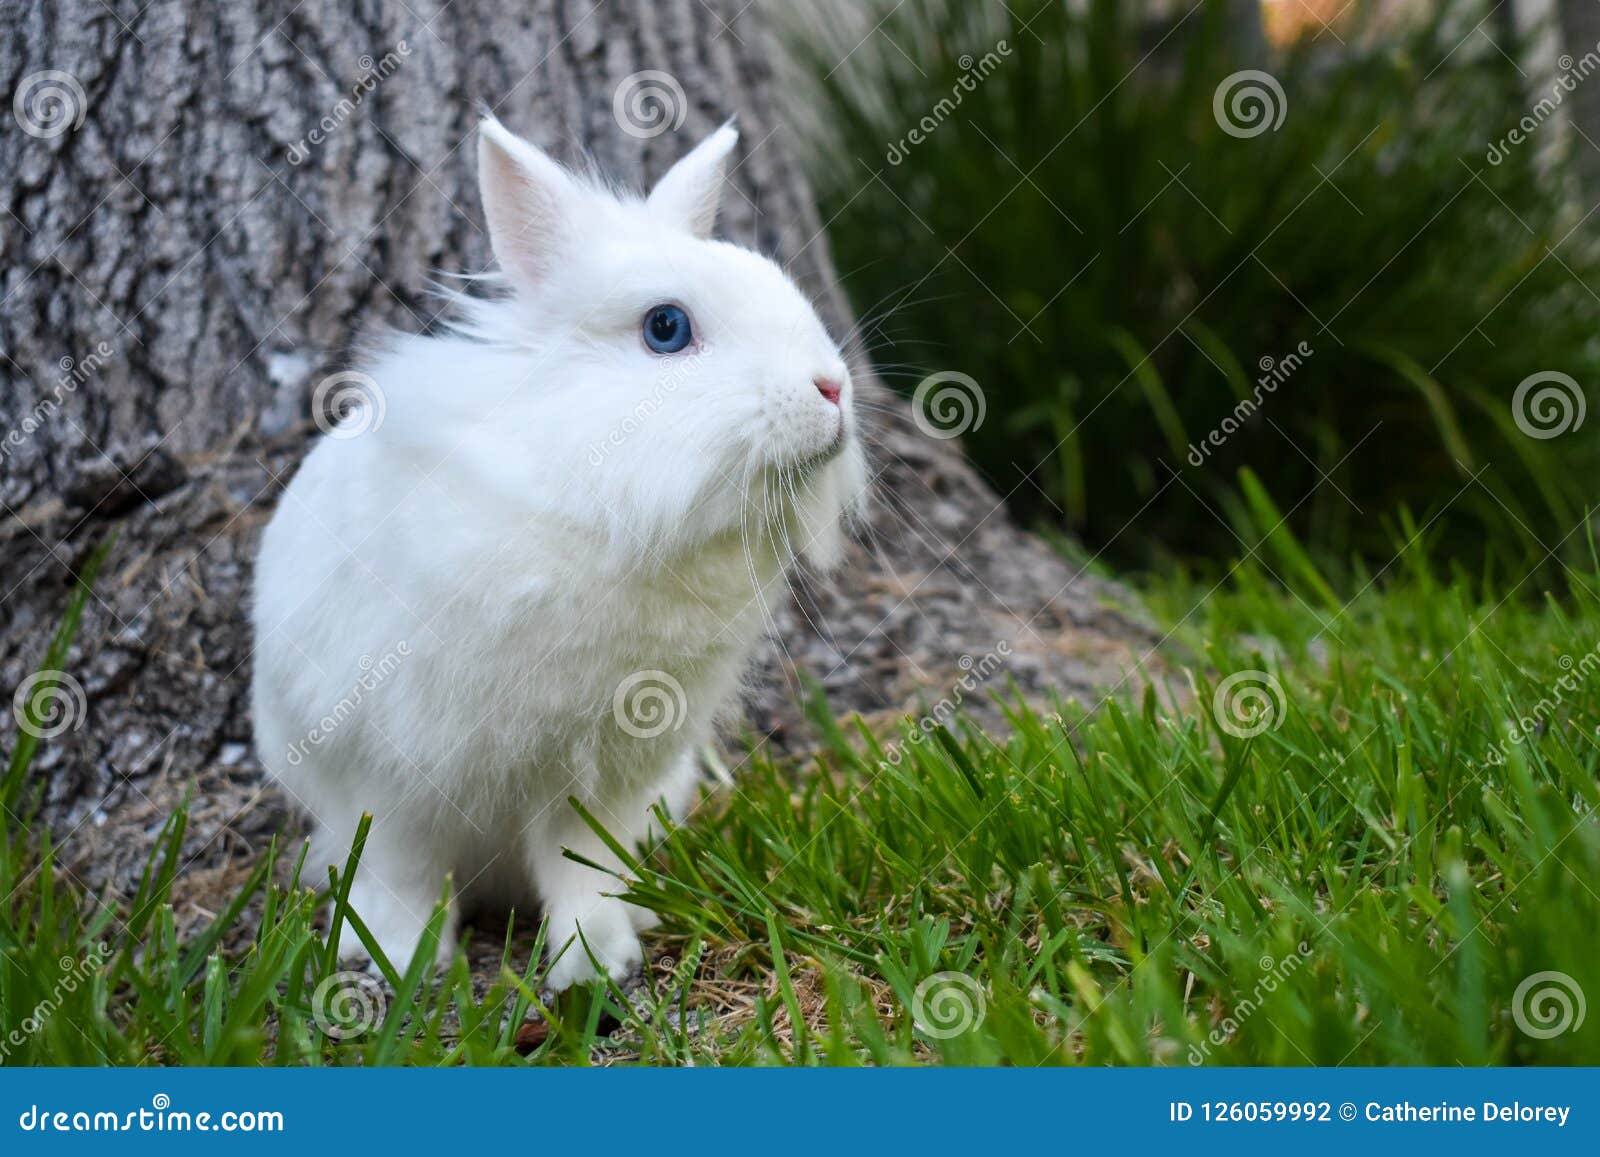 bunny playing in the grass outside